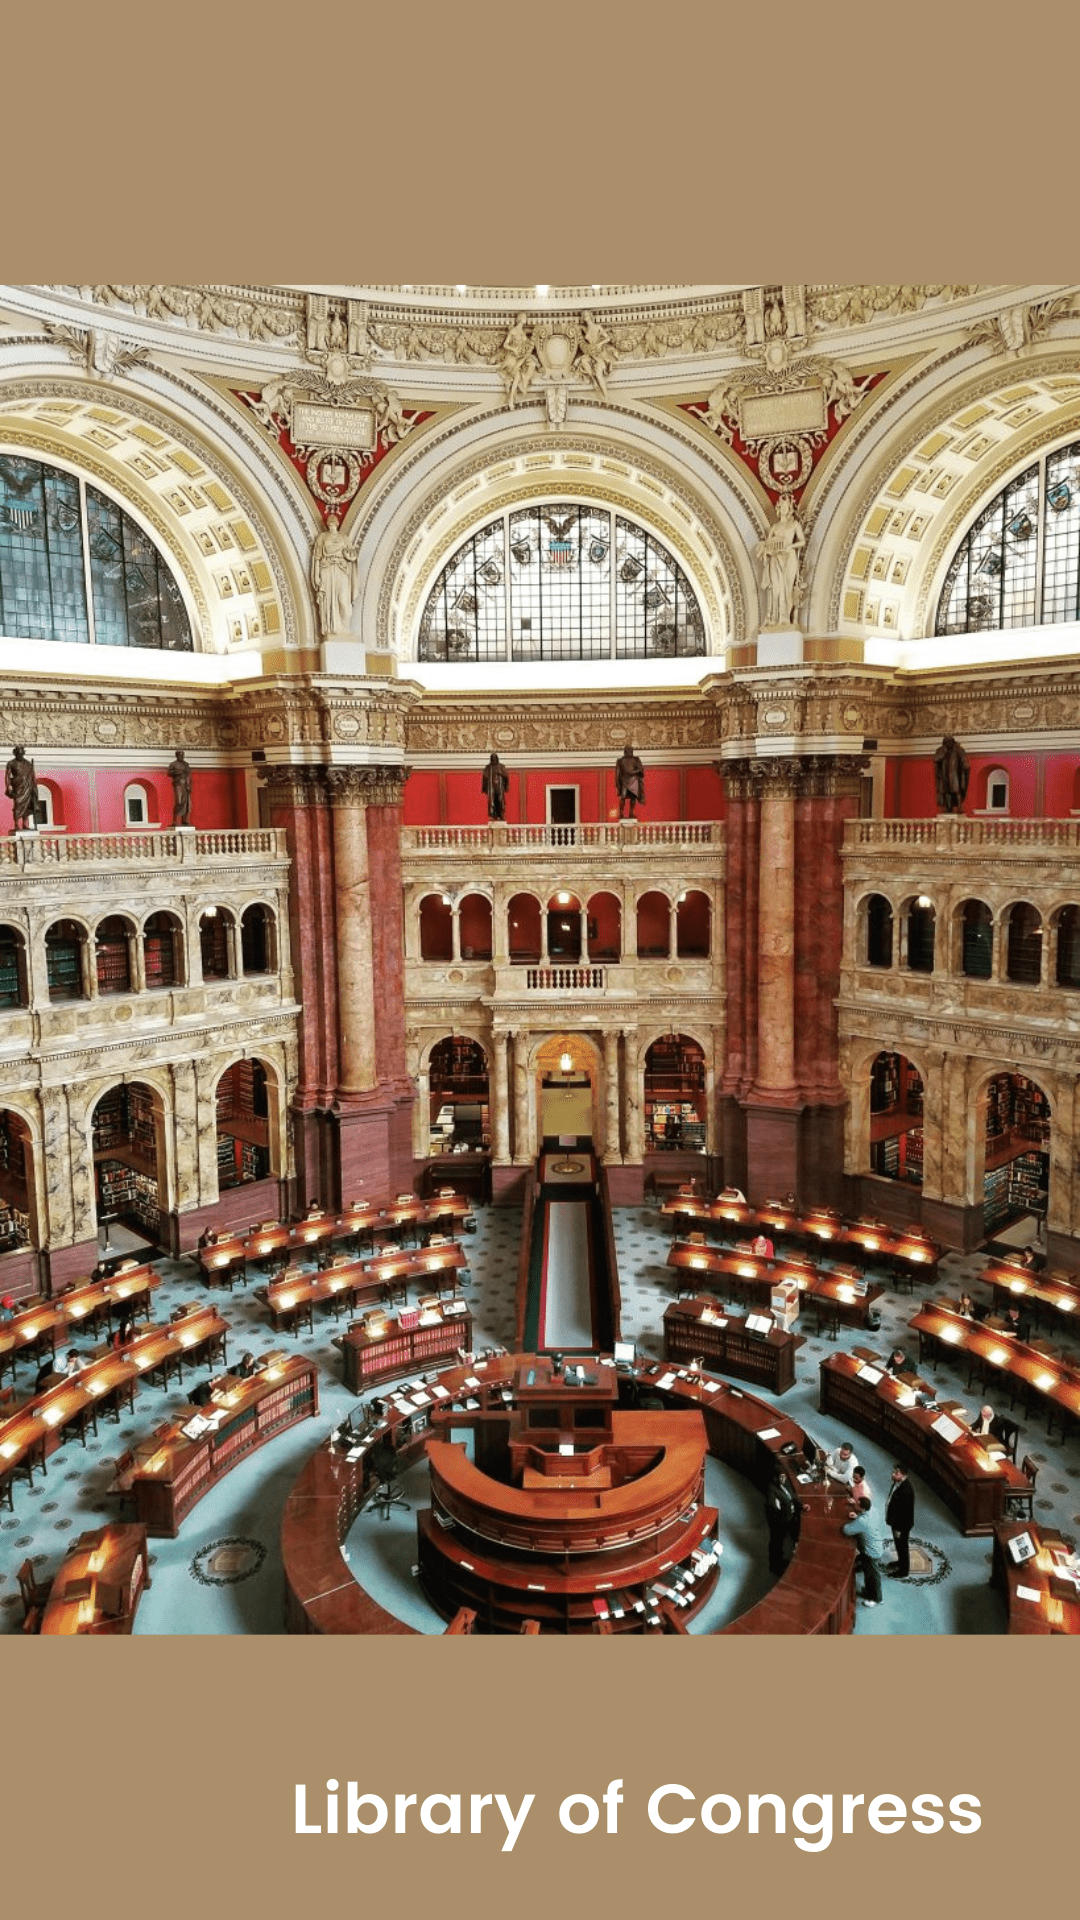 image of the interior of the library of congress